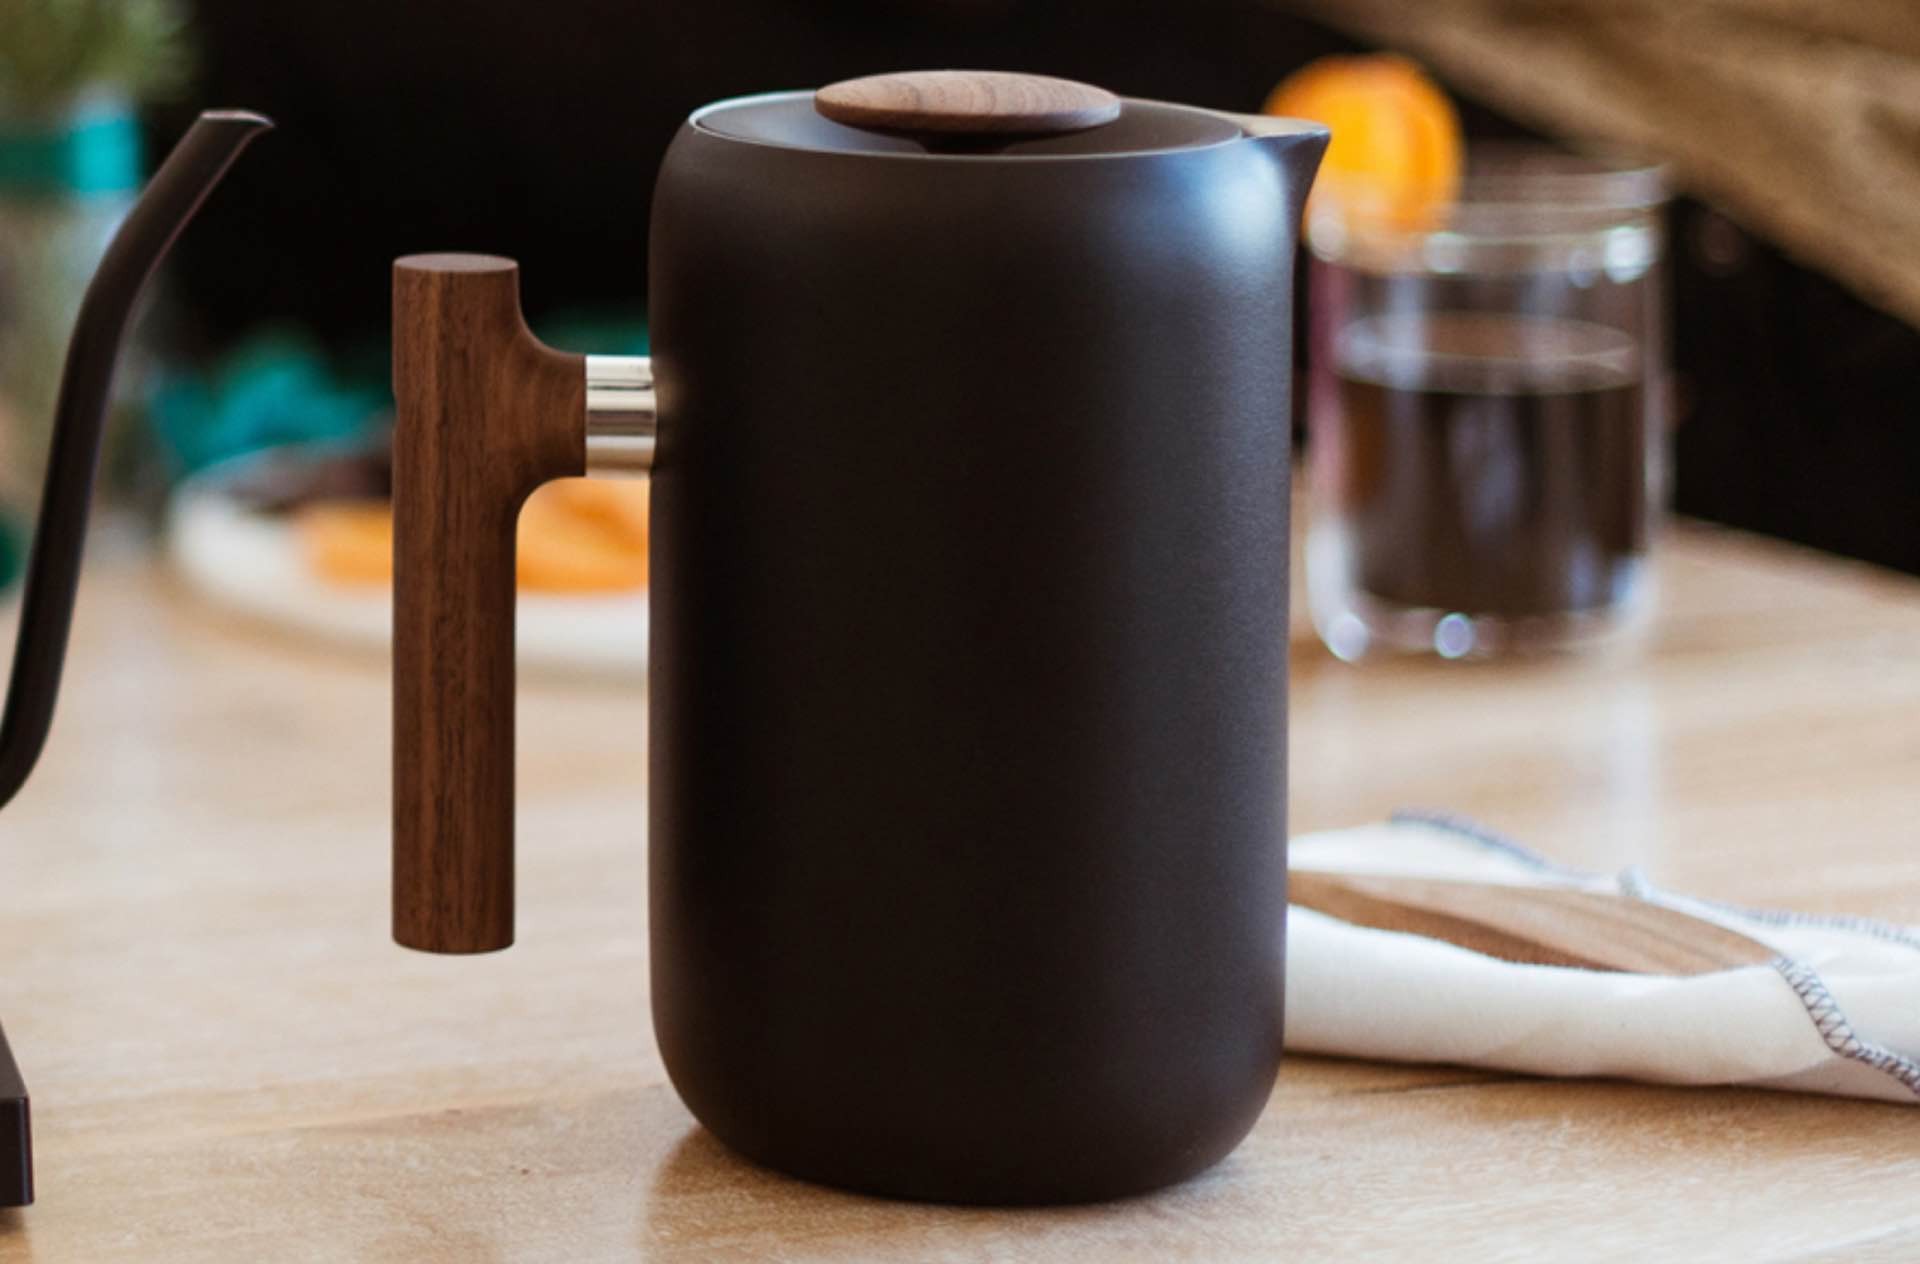 Fellow “Clara” French Press Coffee Maker — Tools and Toys